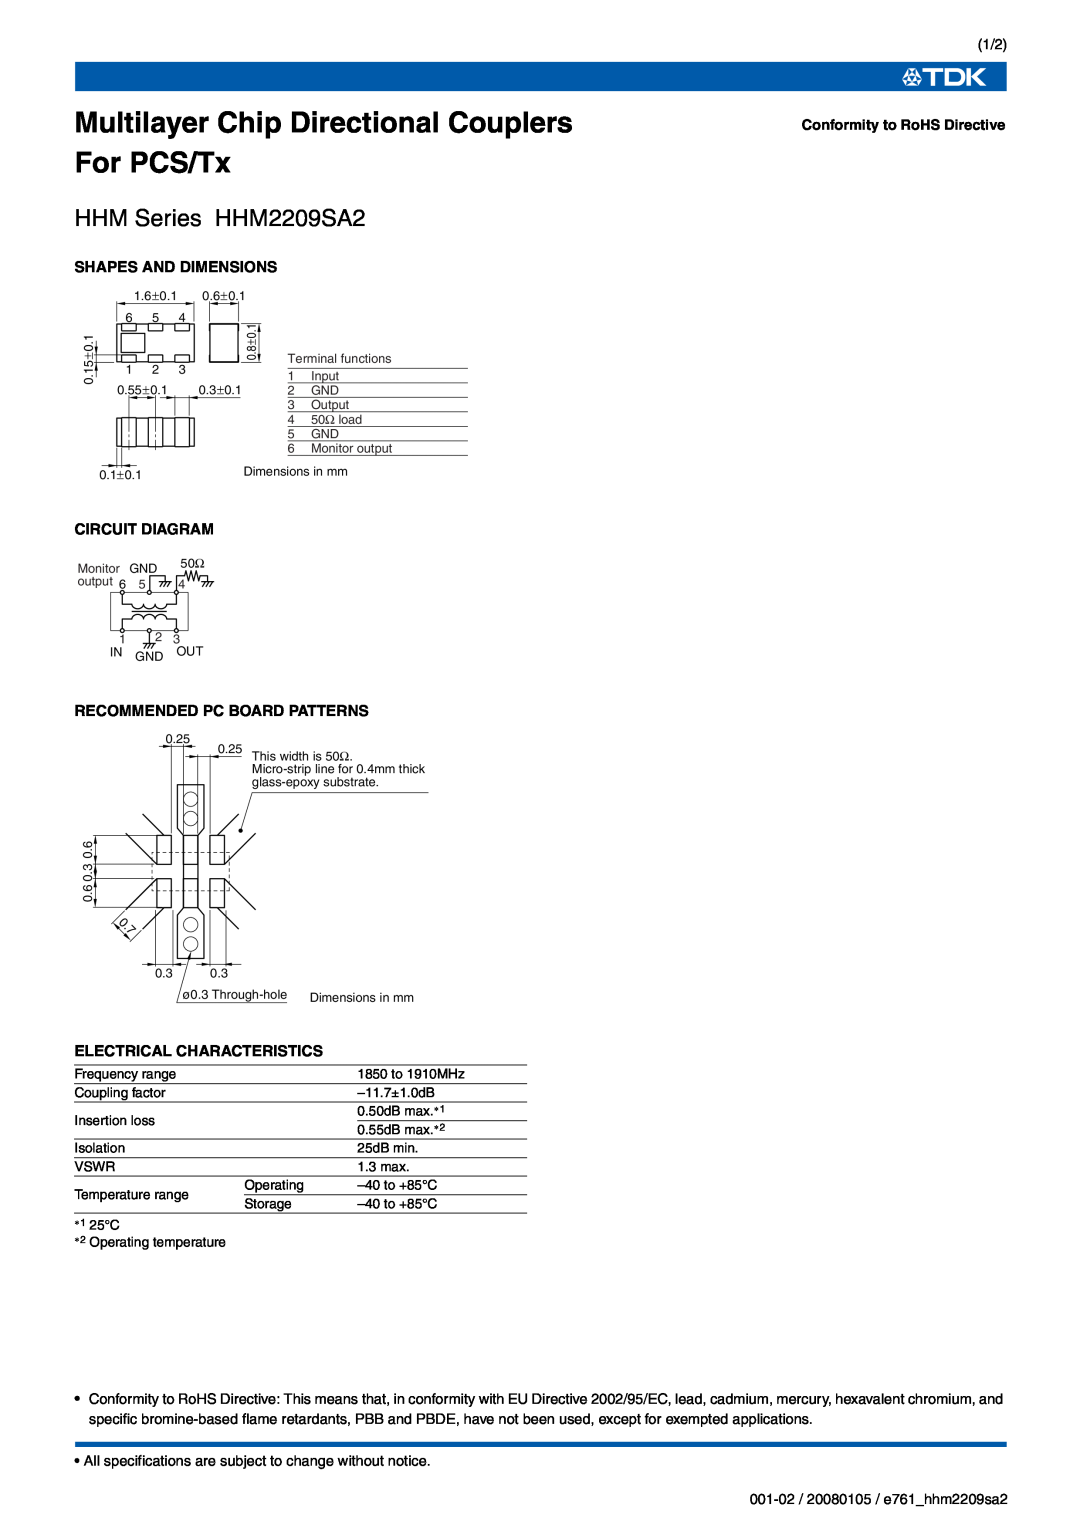 TDK HHM Series HHM2209SA2 specifications Shapes And Dimensions, Conformity to RoHS Directive, Circuit Diagram 